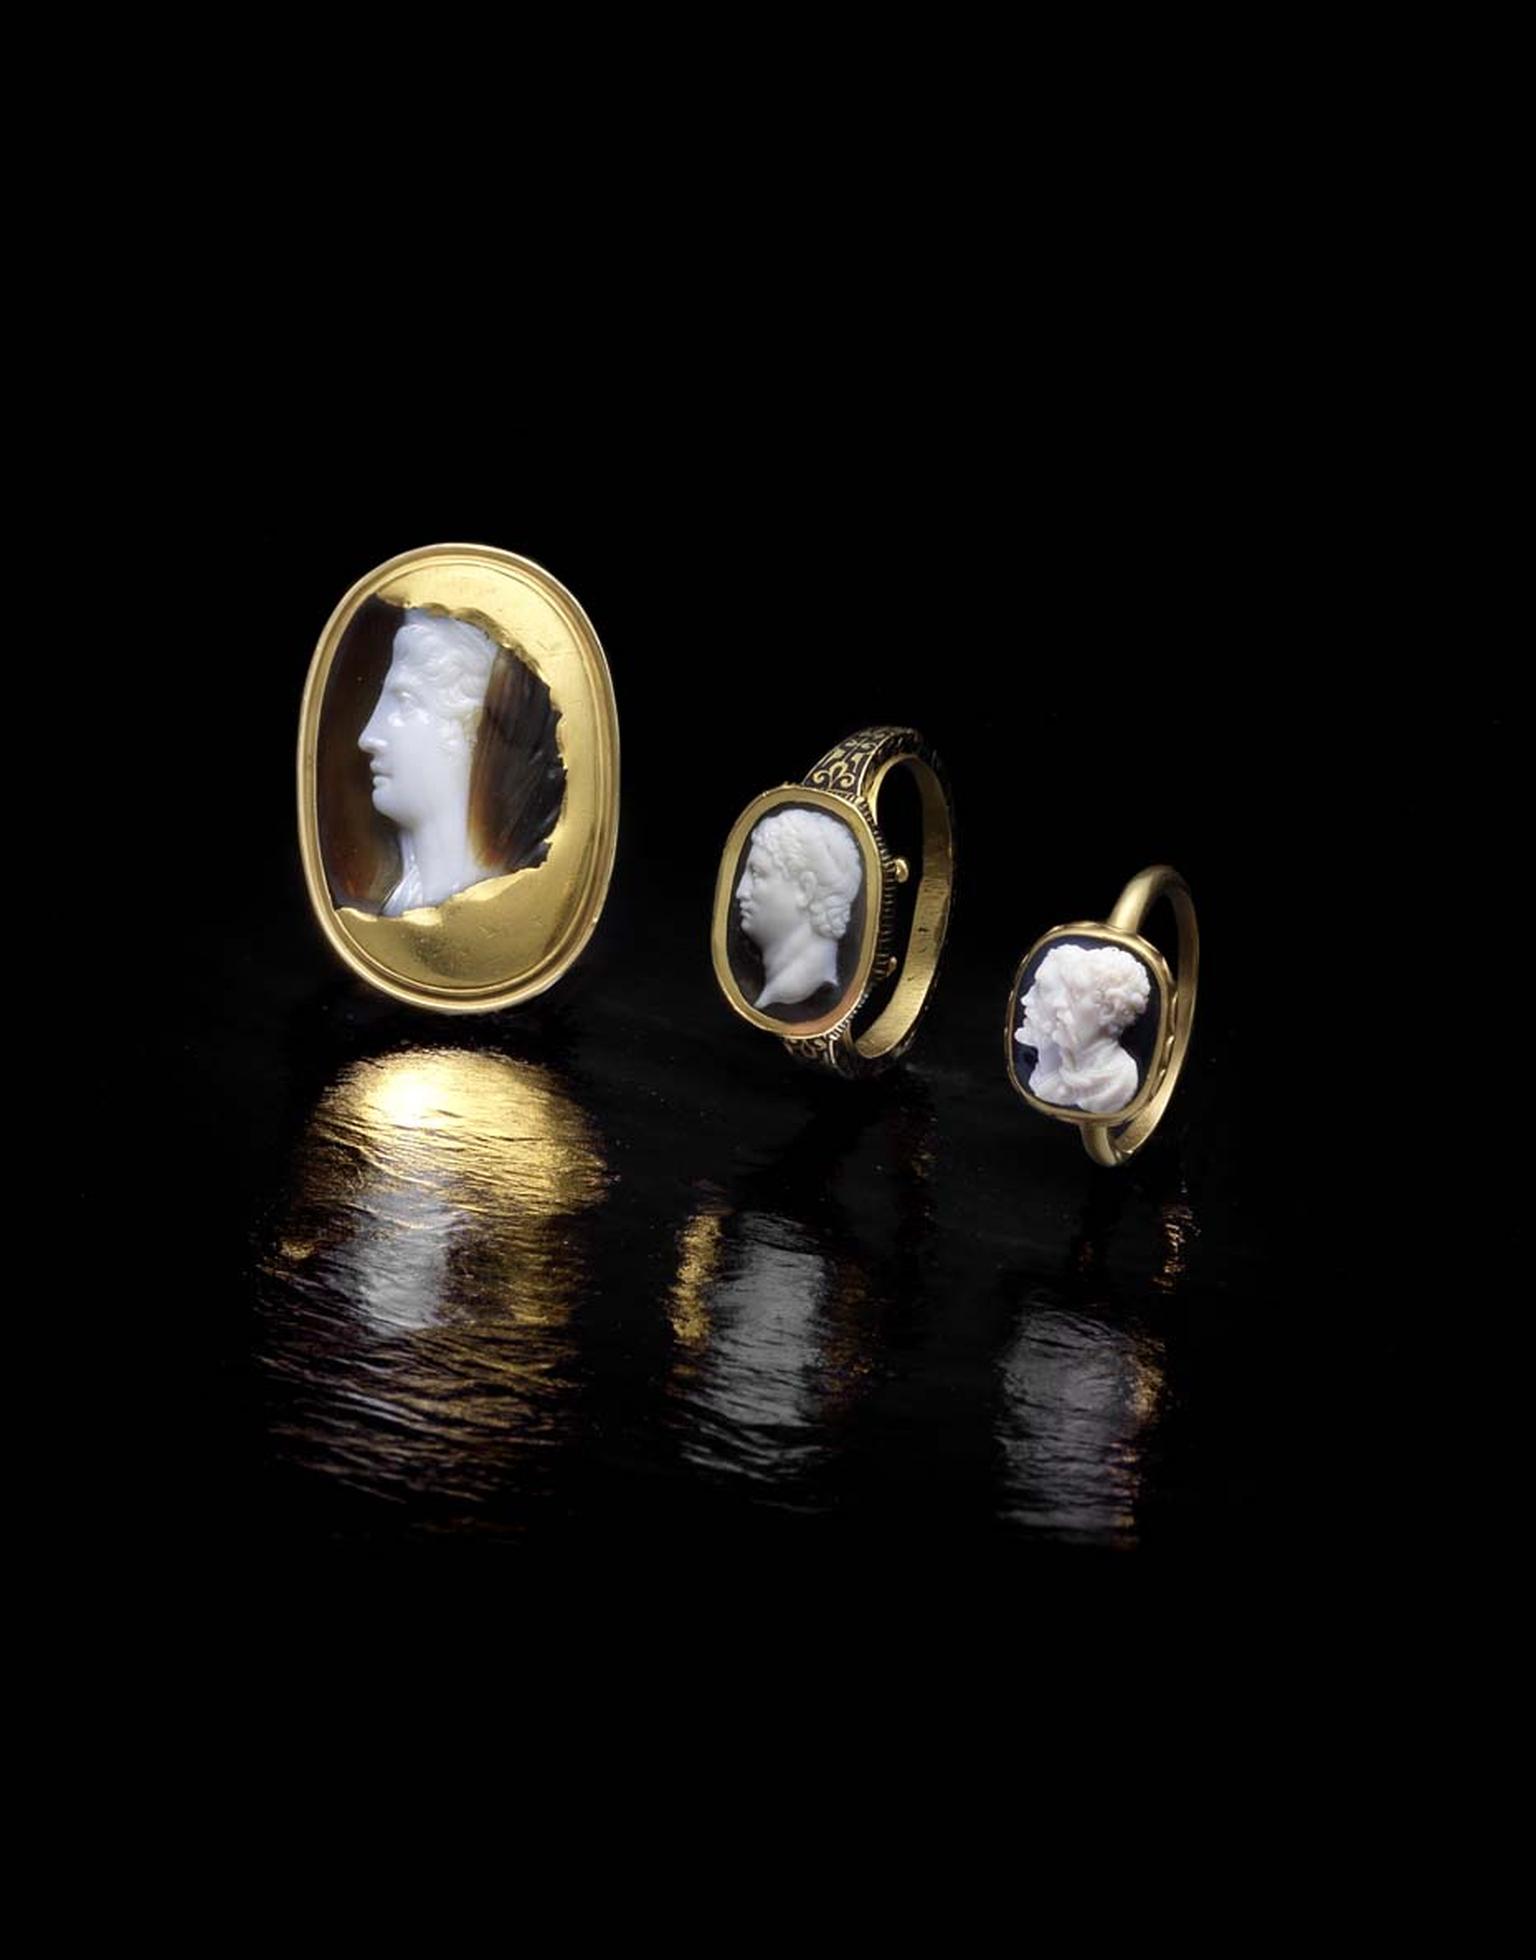 Various cameo rings, all part of the Ceres Collection, collected by an American family over a period of 60 years was sold on 17th September 2014 at Bonhams London.